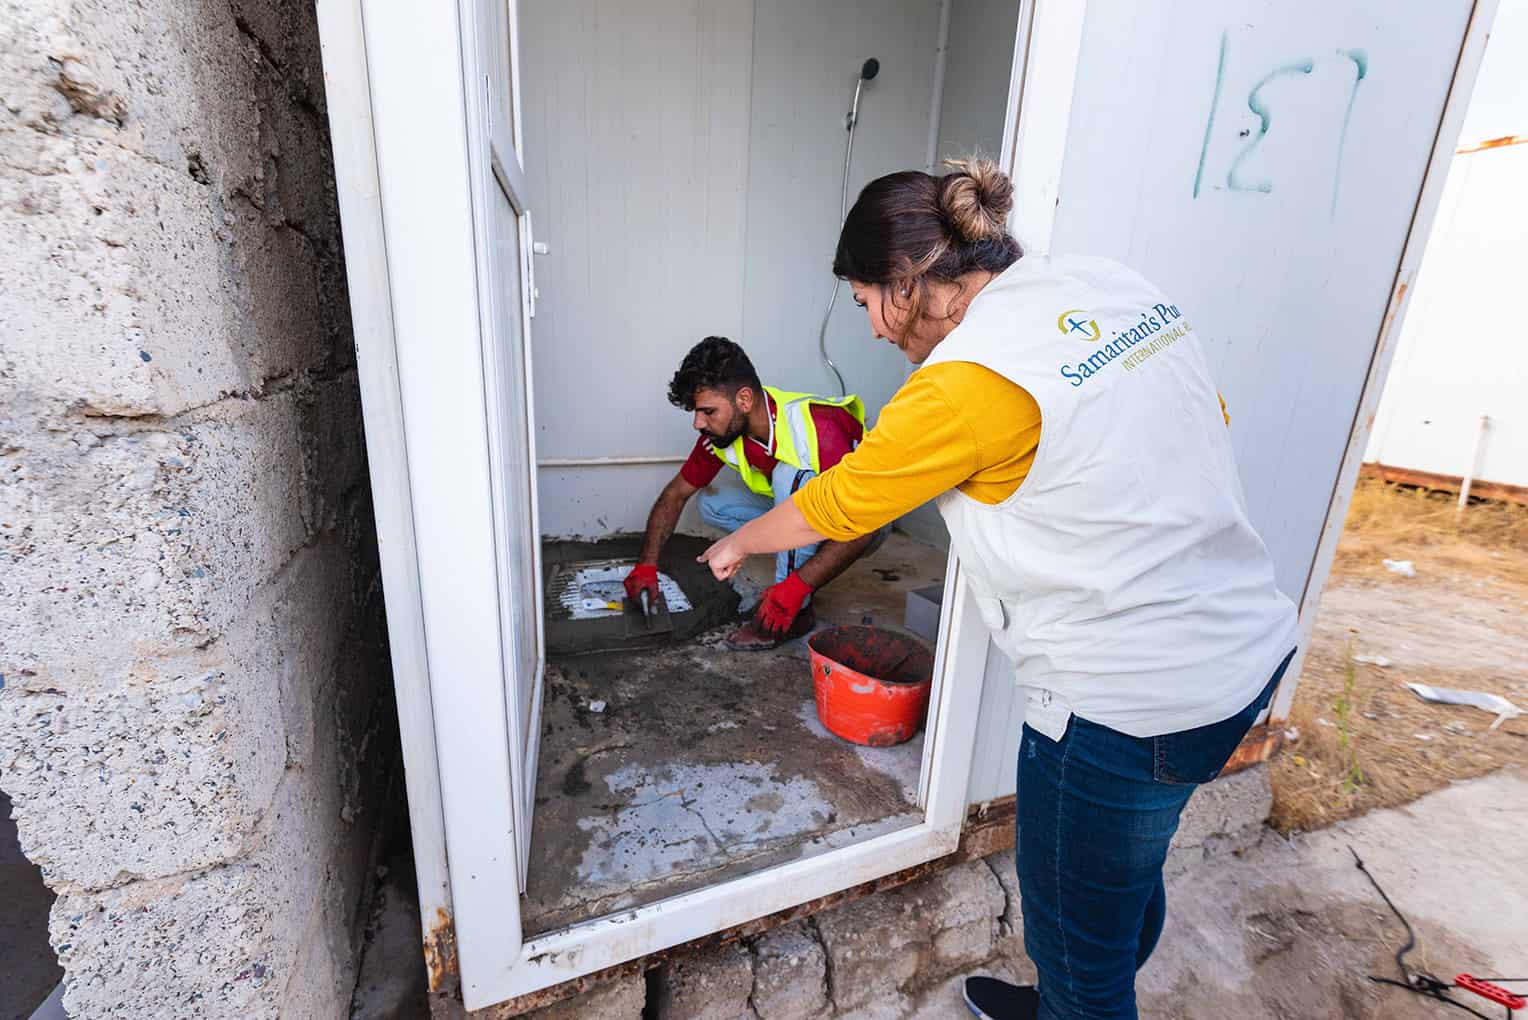 Samaritan’s Purse is repairing latrines in the camp to promote better hygiene during this time of crisis.